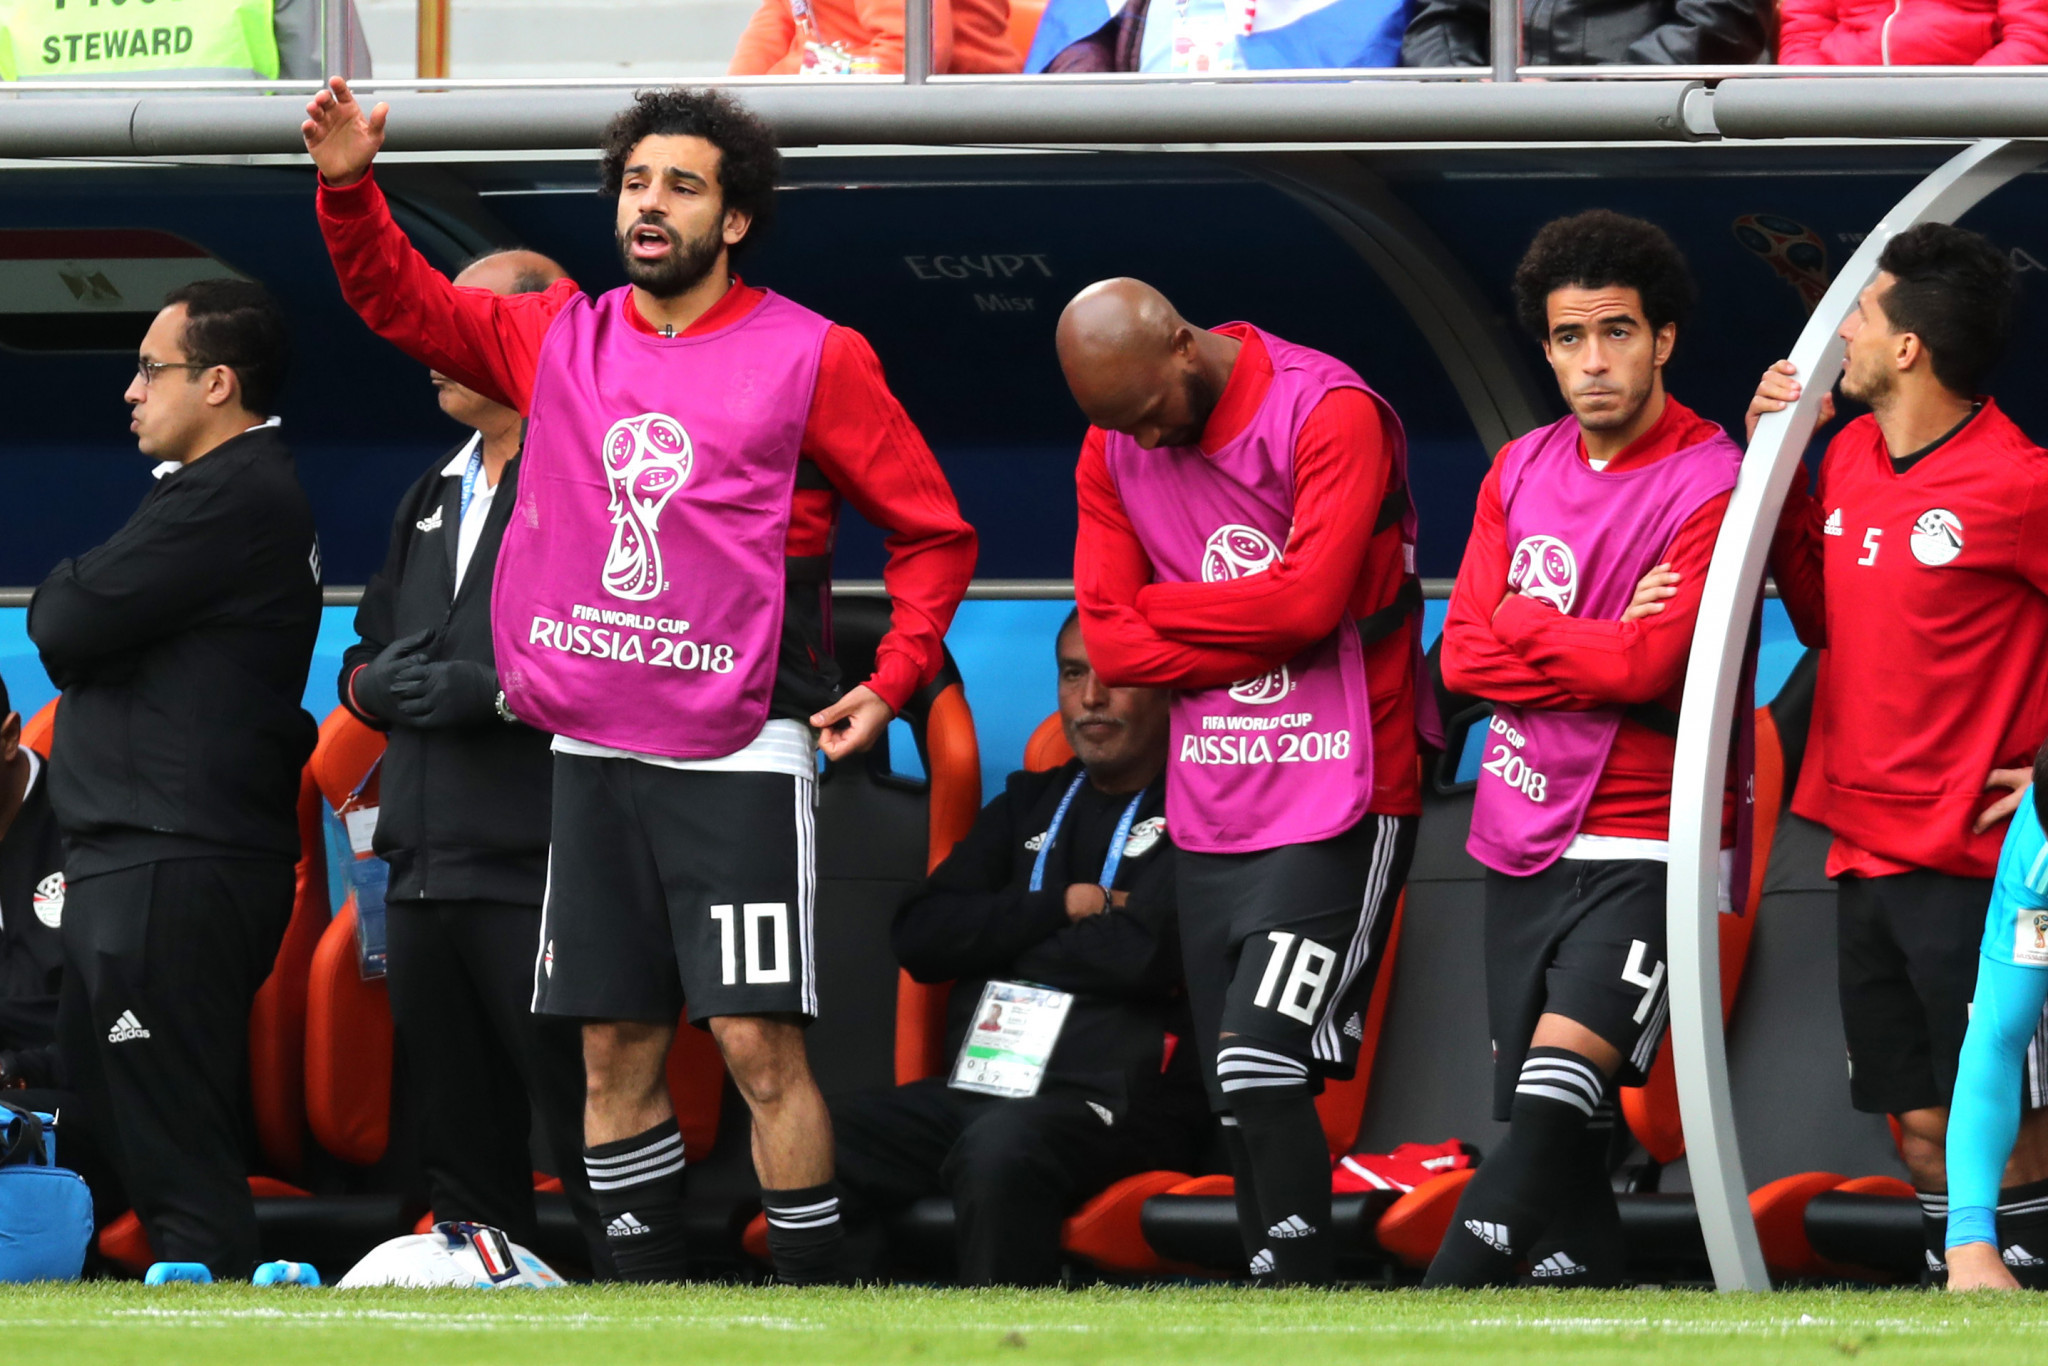 Key player Mohamed Salah remained on the bench for Egypt throughout the match ©Getty Images